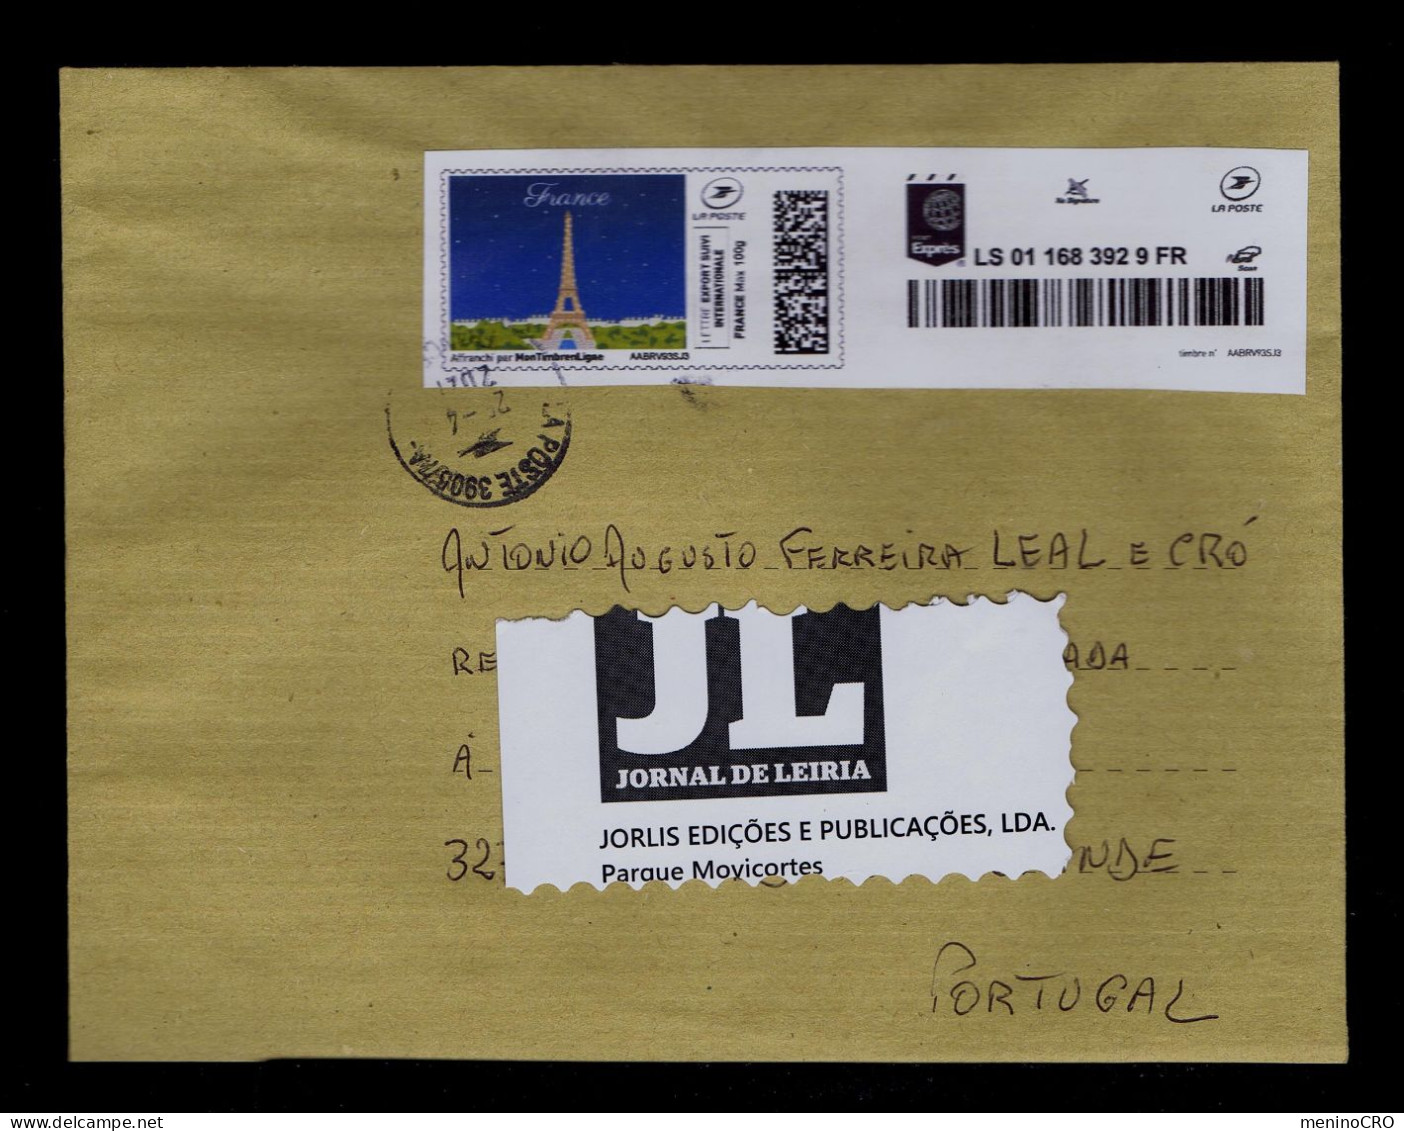 Gc8518 FRANCE "EIFFELL TOWER" Monuments  Post Label (MonTimbreLigne) Expres LA POSTE Mailed 2021 Portugal - Monuments